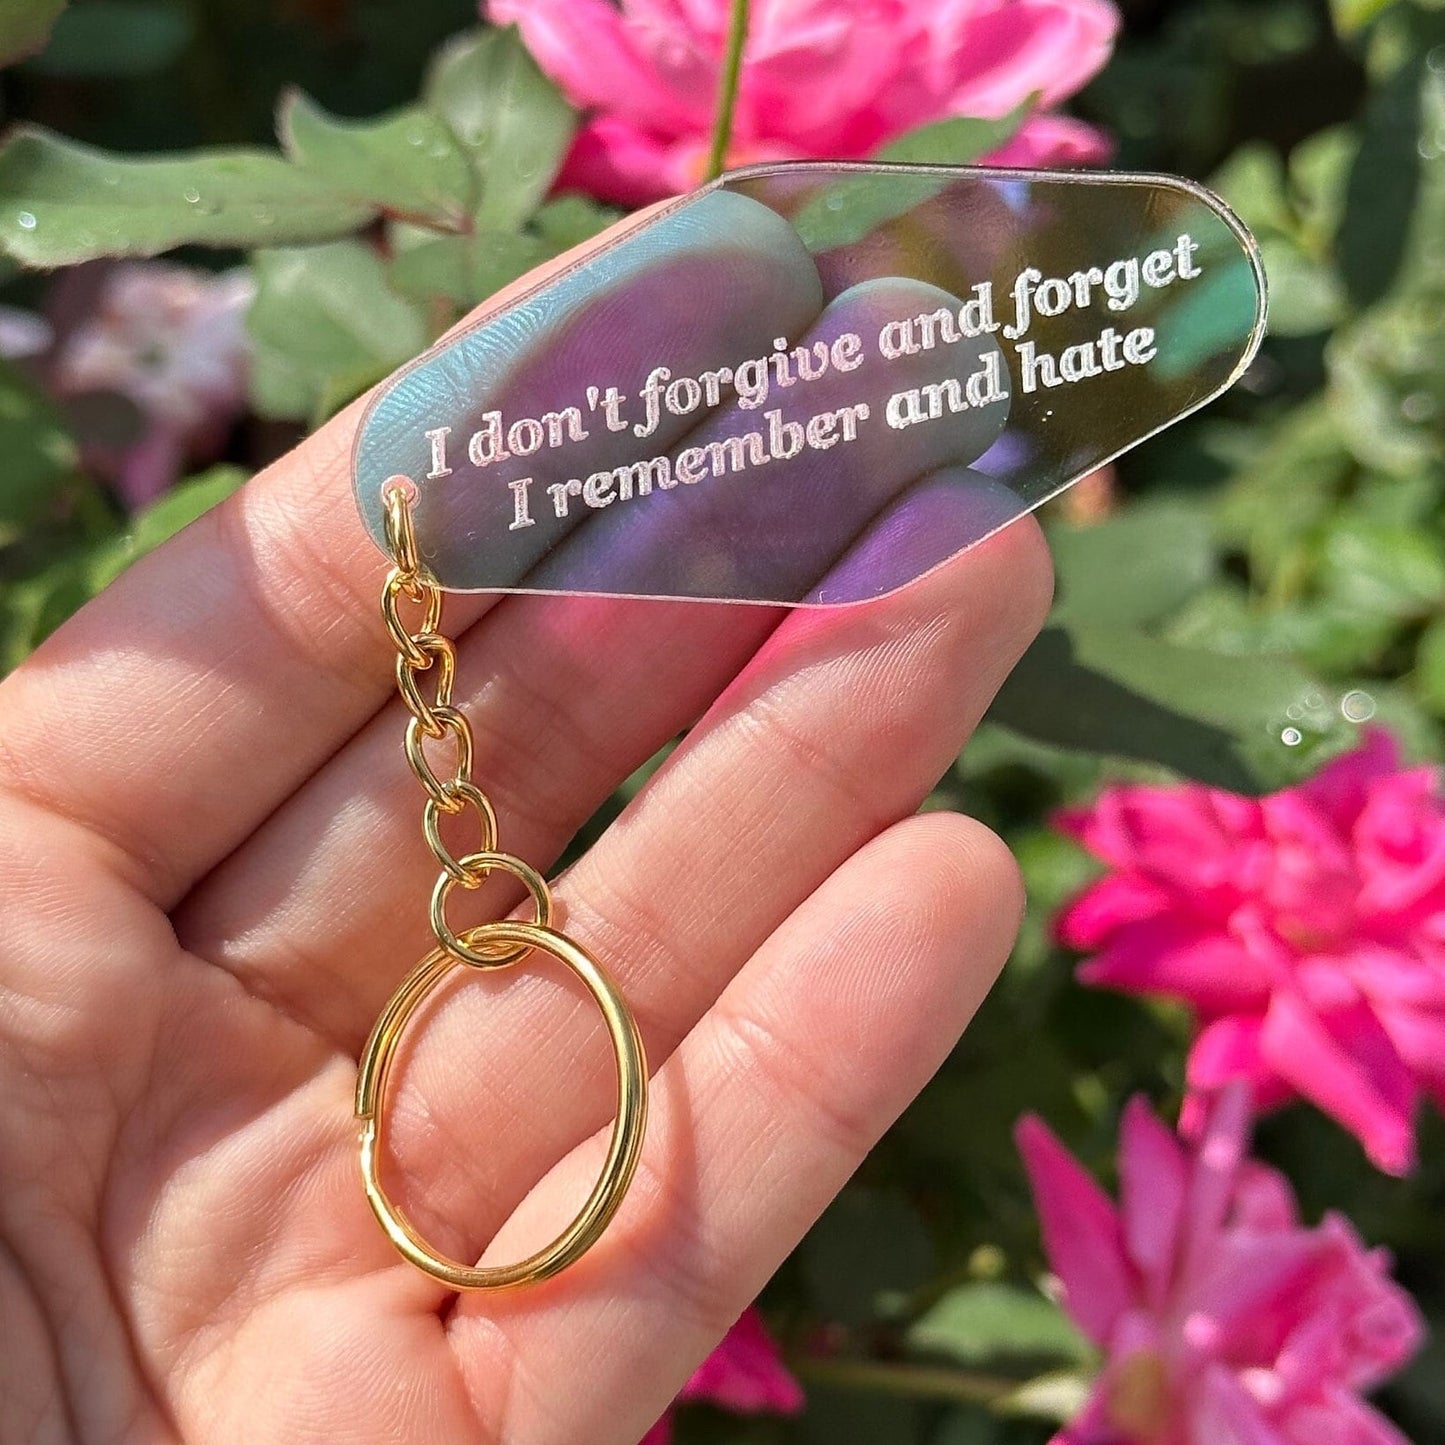 I Don’t Forgive And Forget I Remember And Hate Iridescent Acrylic Motel Keychain